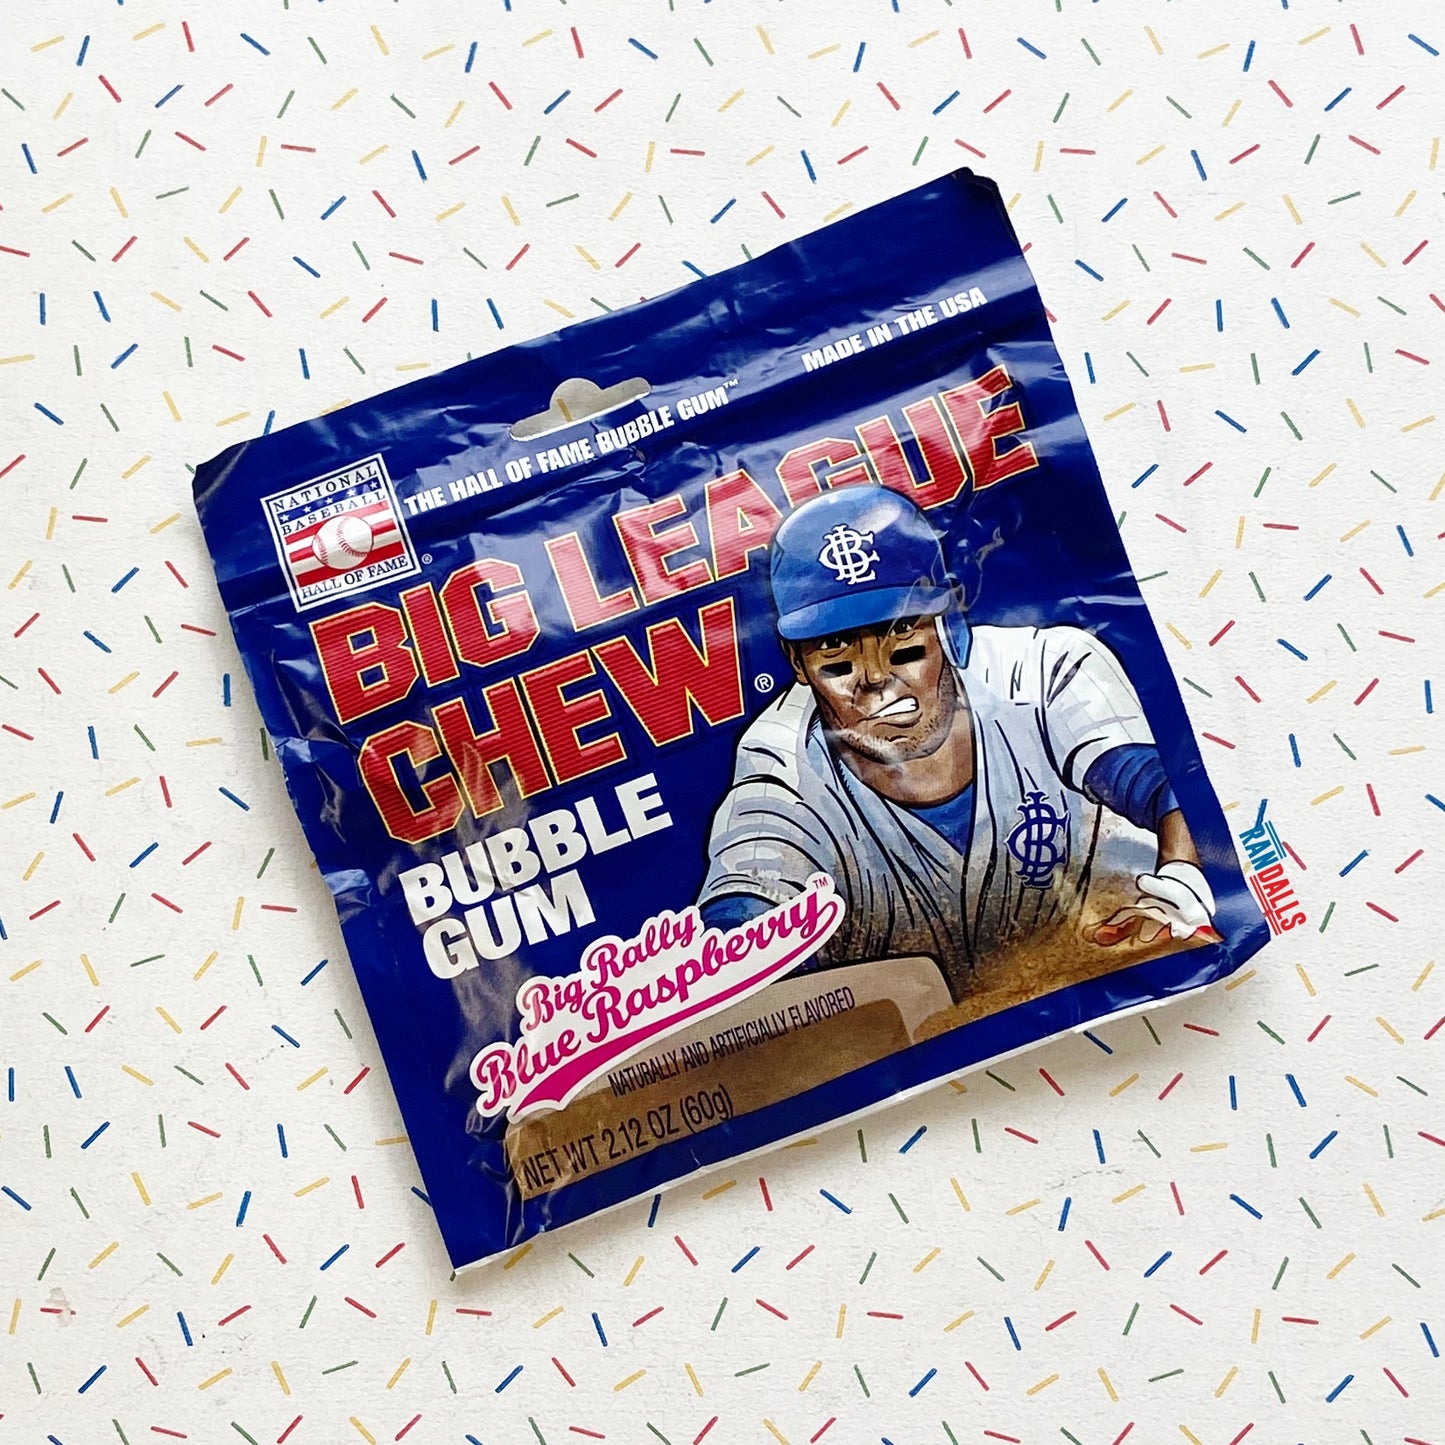 big league chew, bubblegum, chewing gum, national baseball hall of fame, the hall of fame bubble gum, made in the usa, chewing gum, american gum, big rally blue raspberry, usa, randalls,